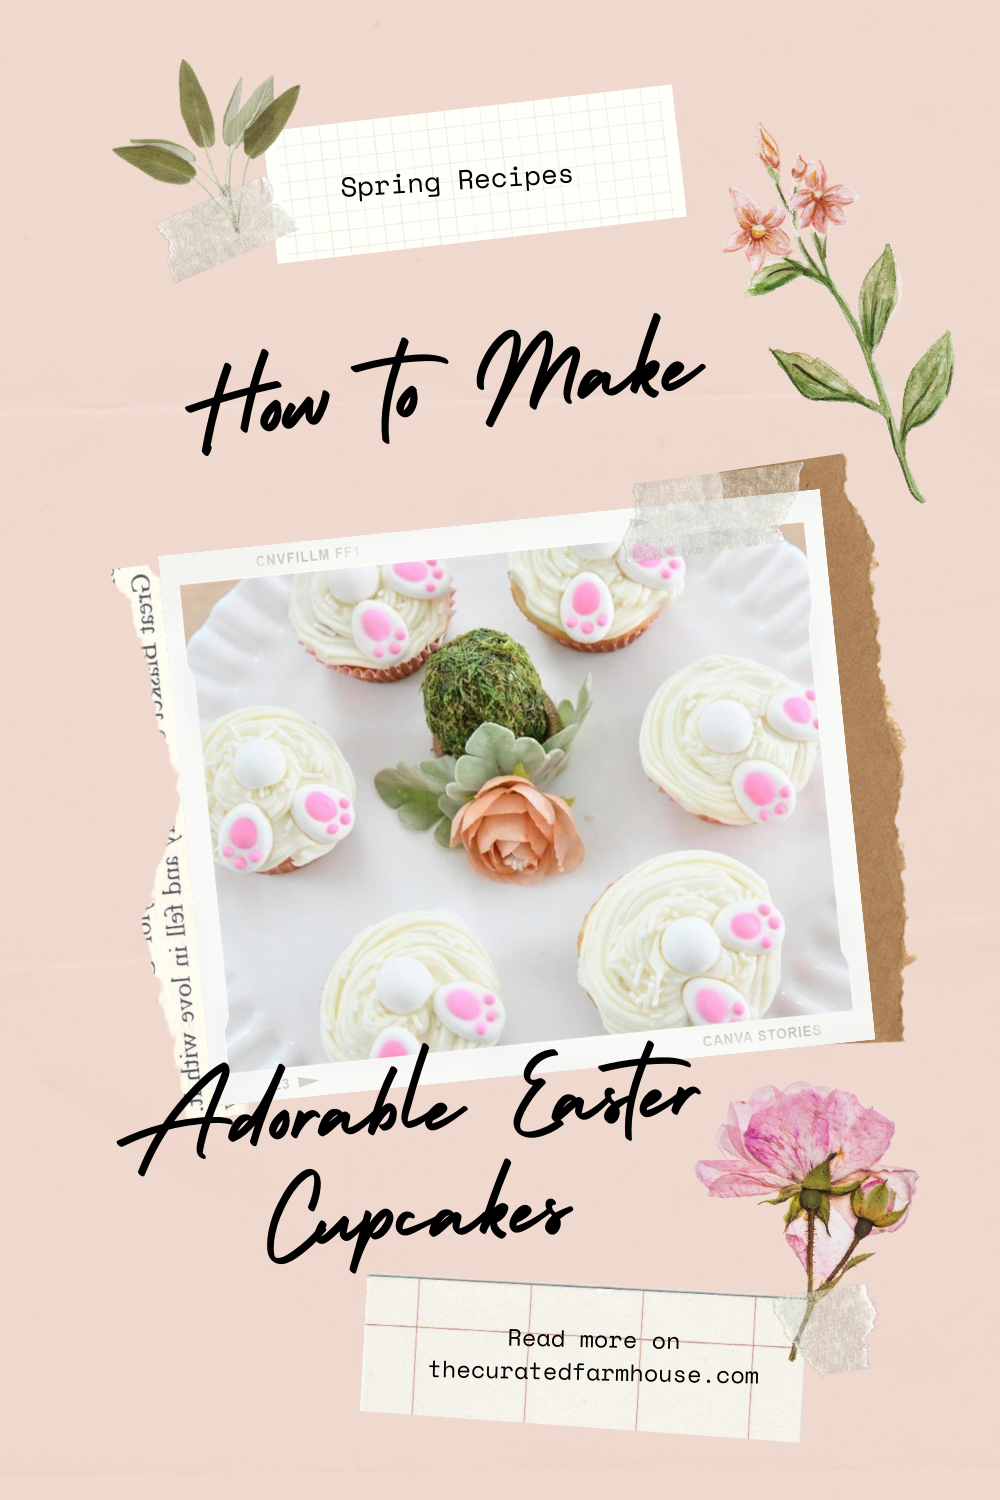 How to Make Adorable Easter Cupcakes